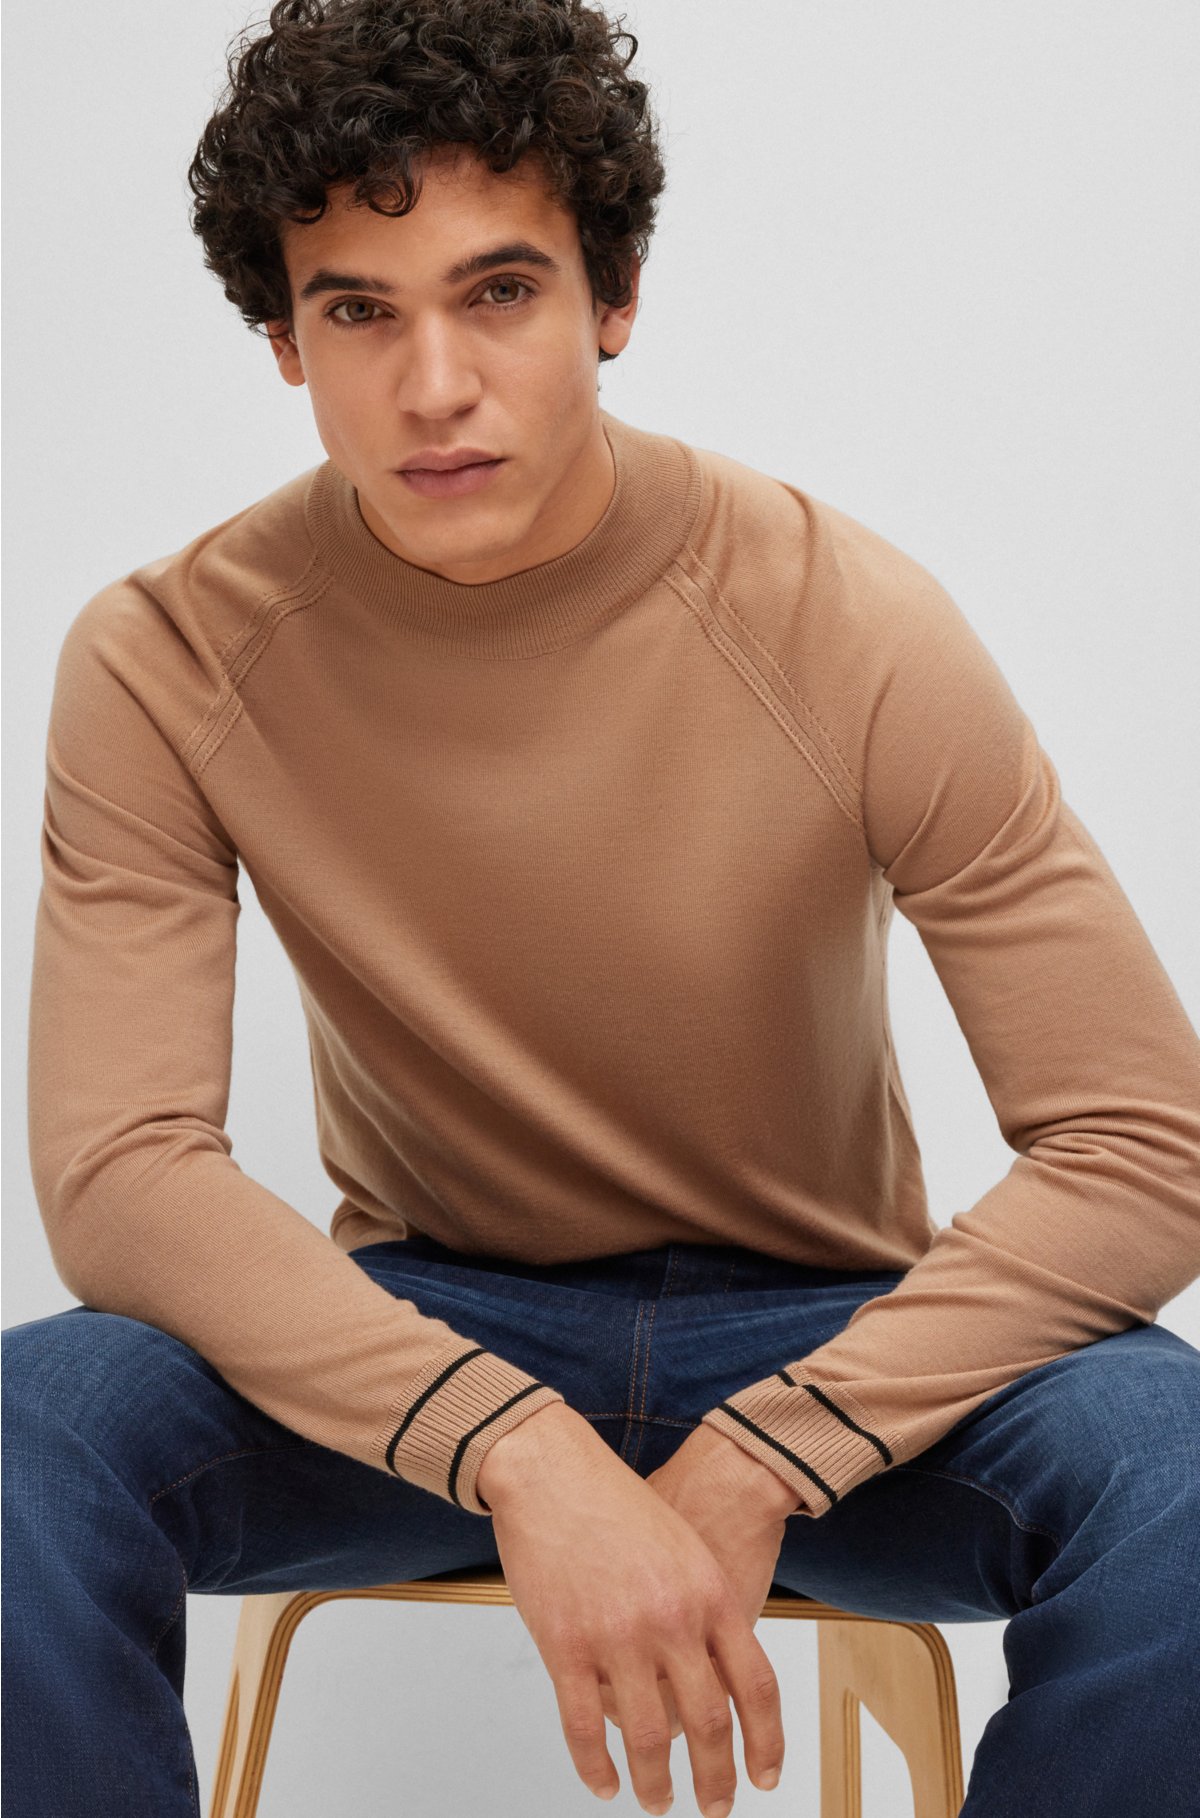 Relaxed Fit Rib-knit Sweater - Beige/striped - Men